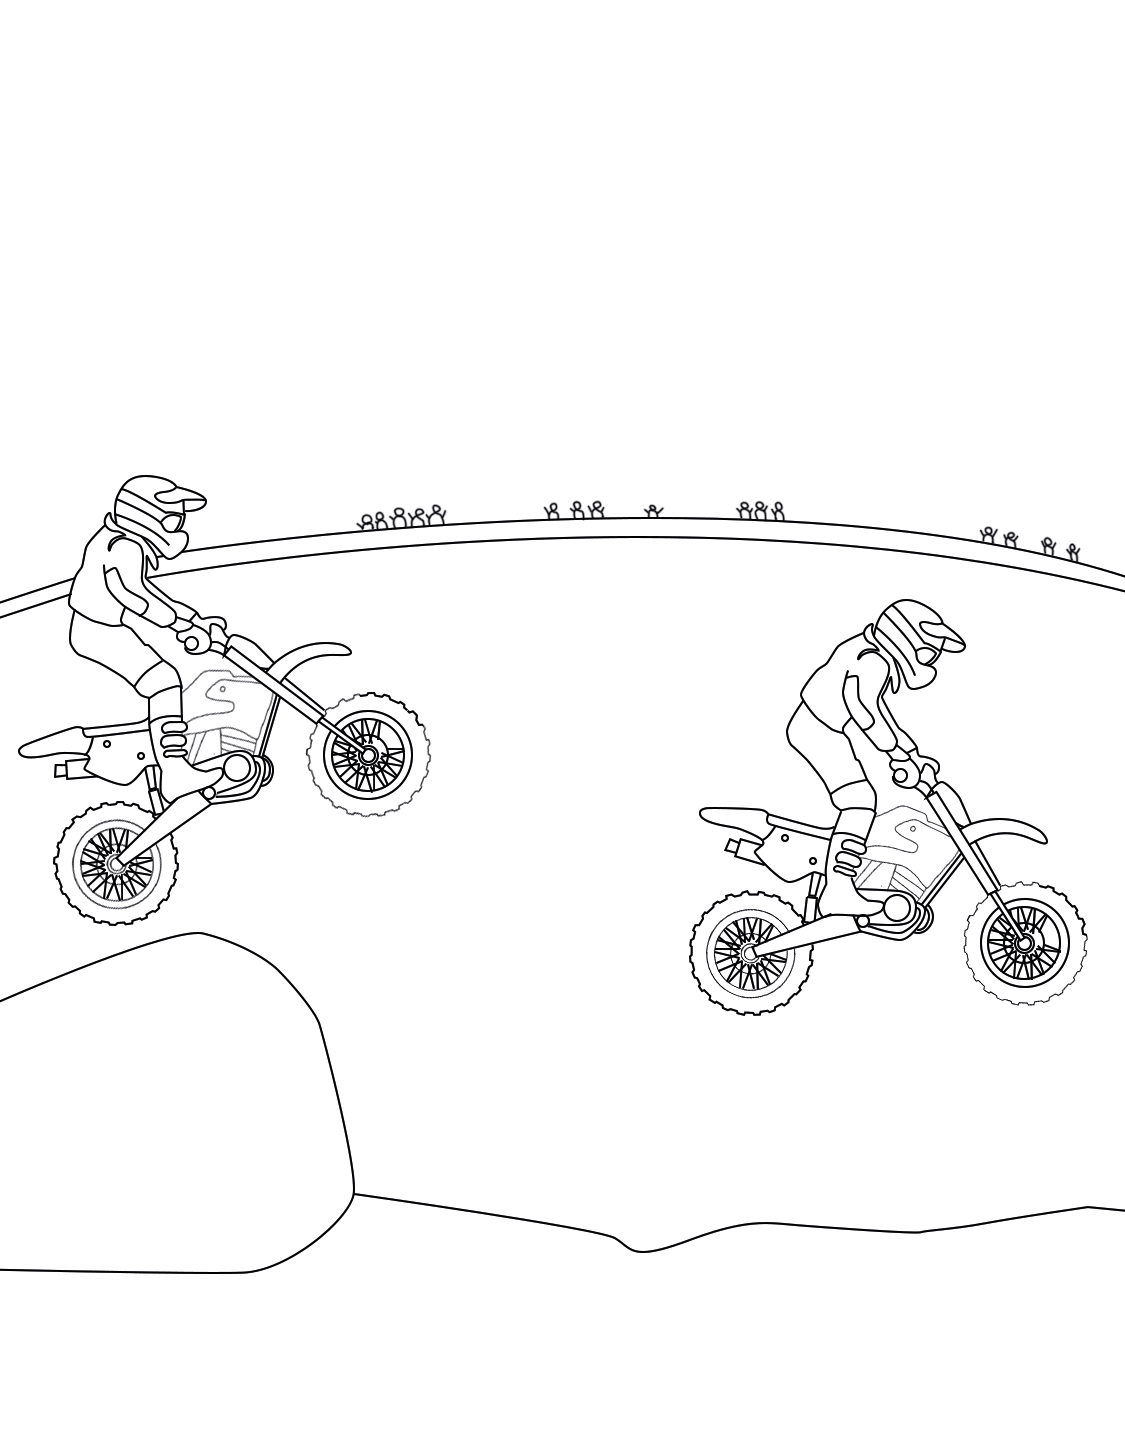 dirt bike motorcycle racing coloring pages